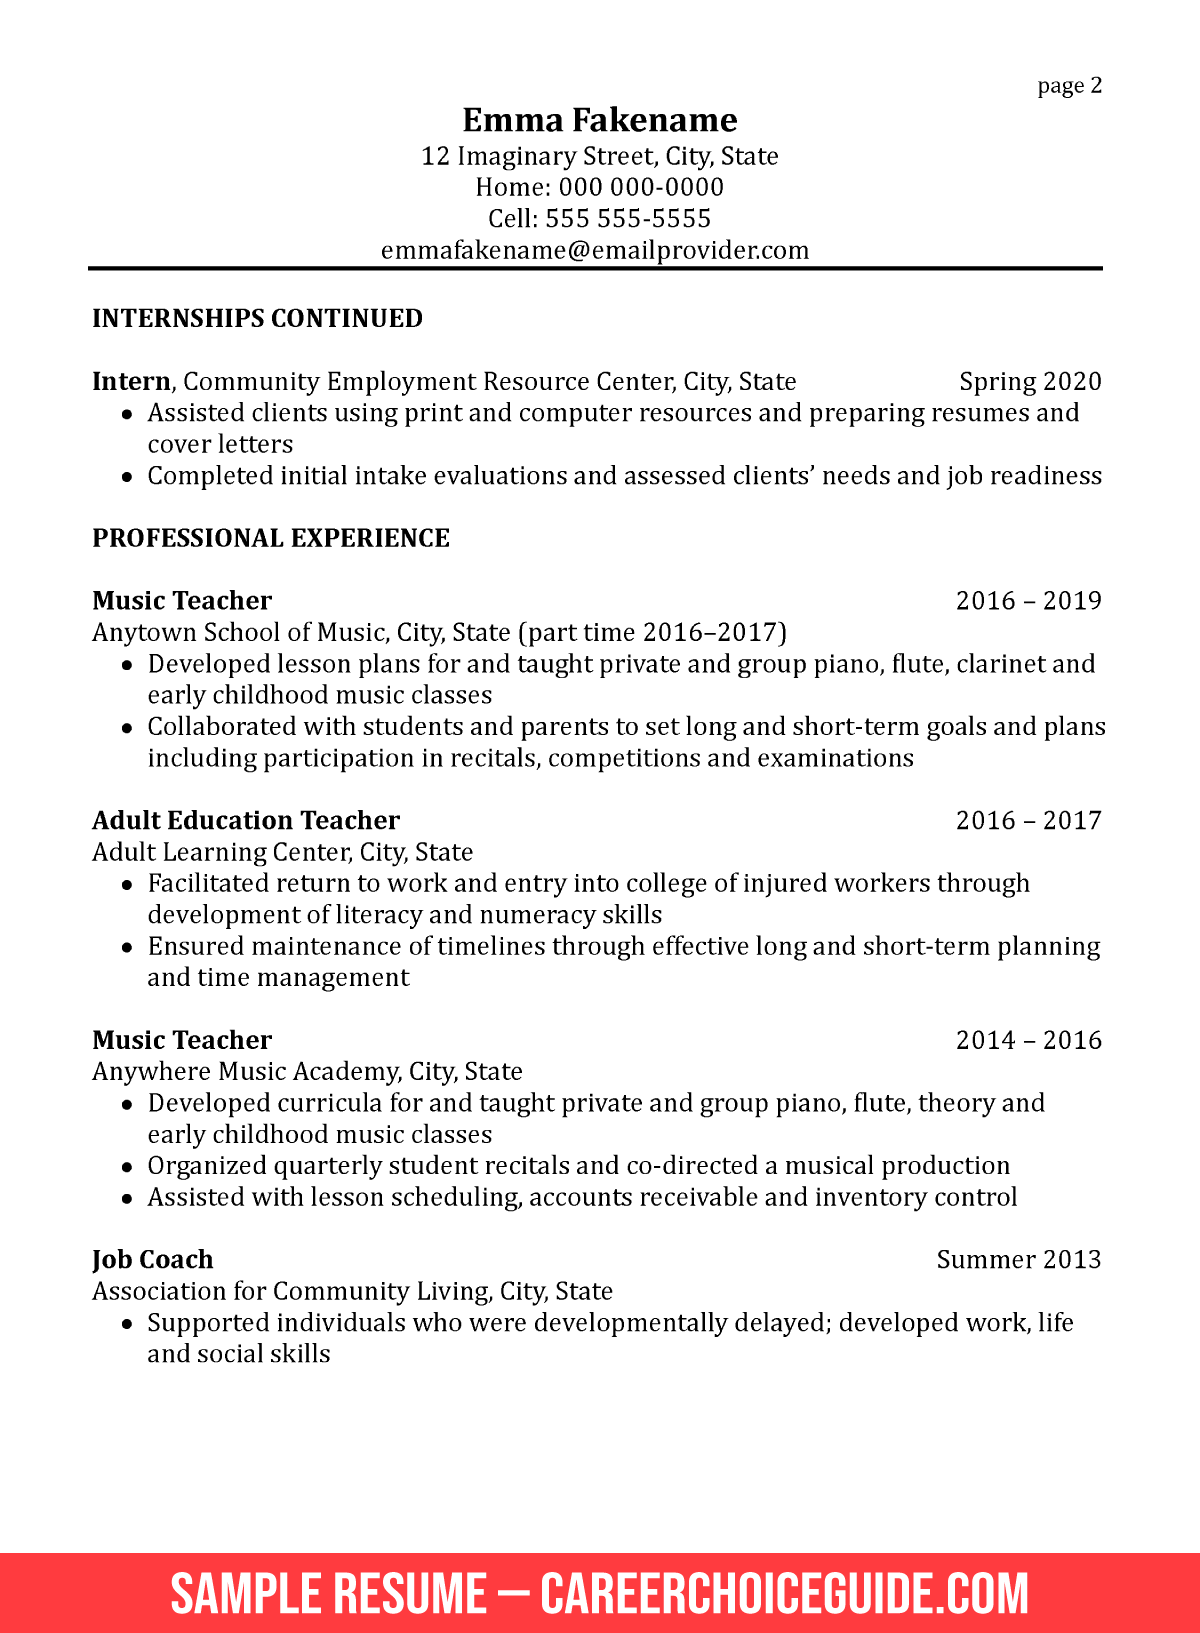 combination resume for career change